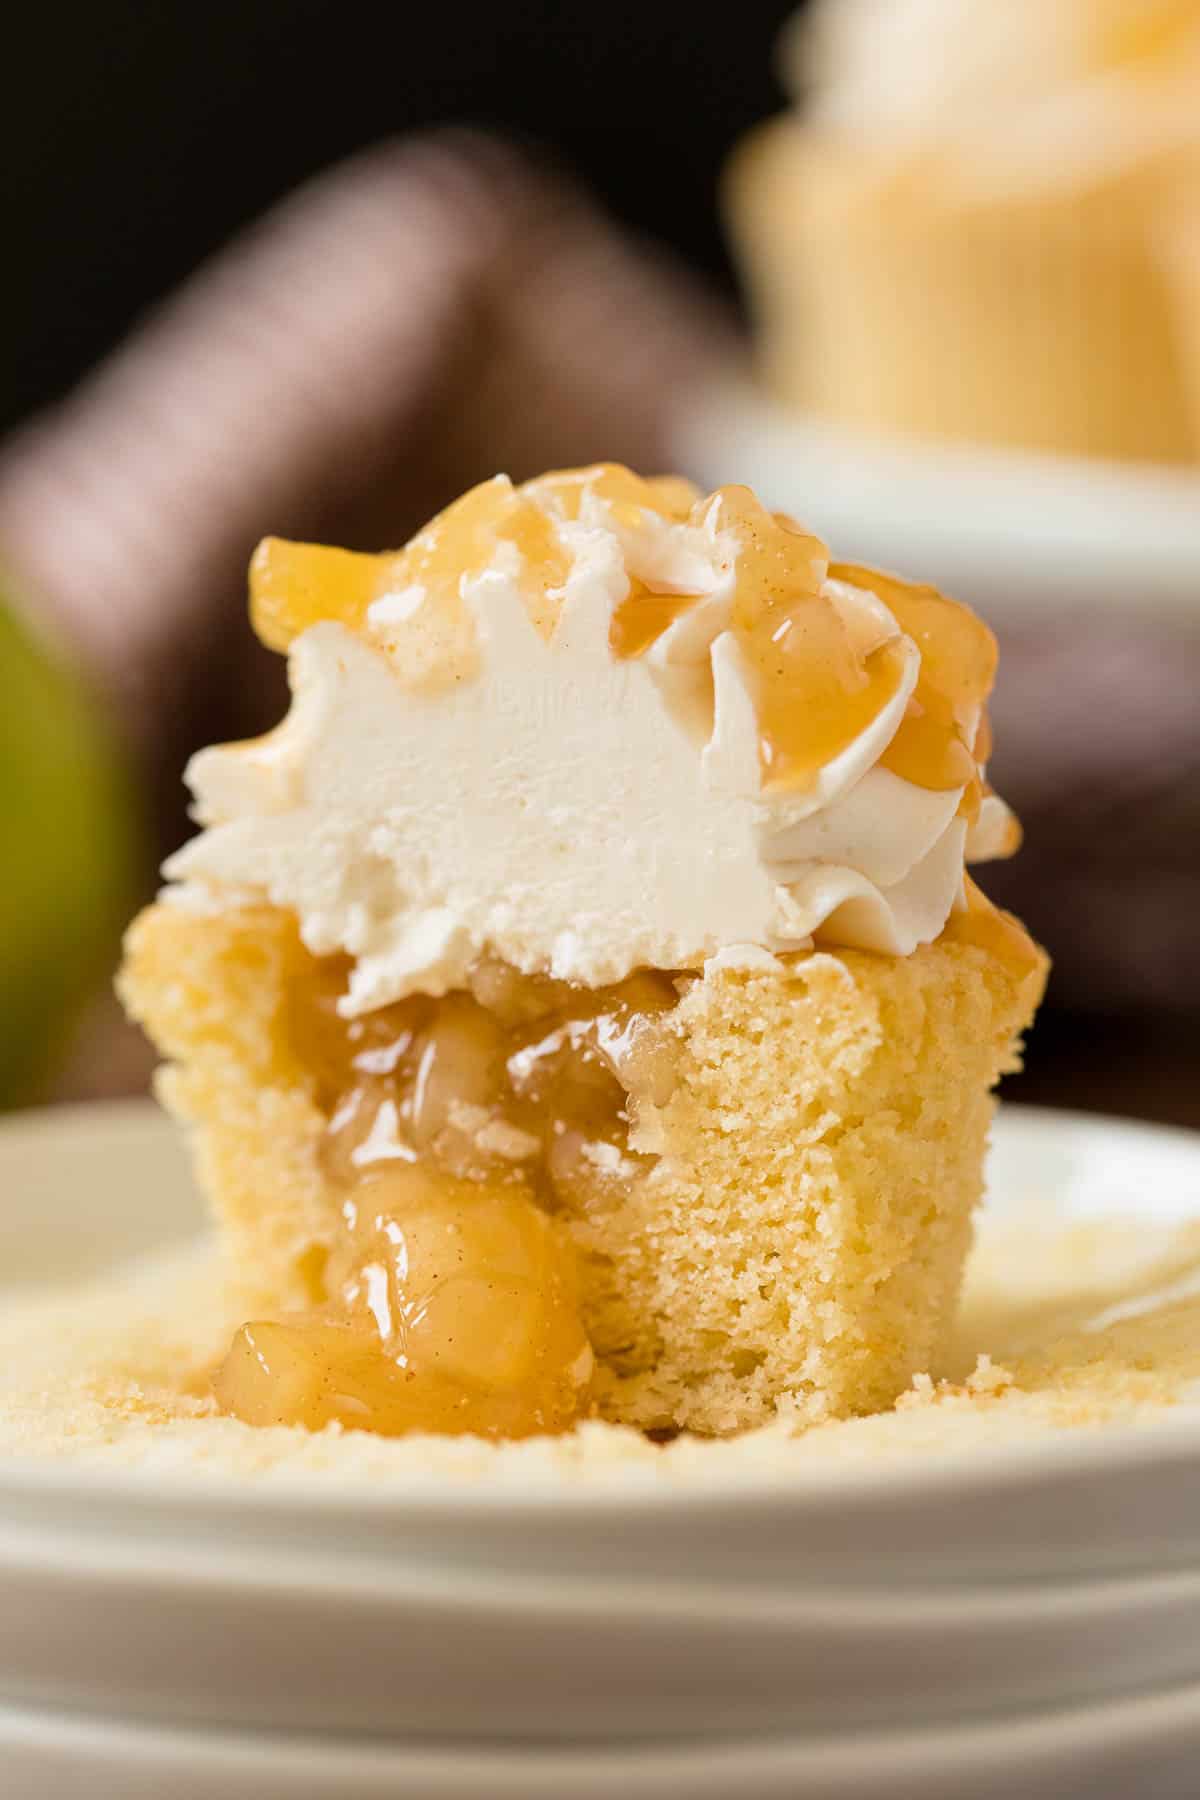 Caramel Apple Cupcakes - Fall in a cupcake! Sweet caramel and apple pie are packed into this delicious handheld dessert.